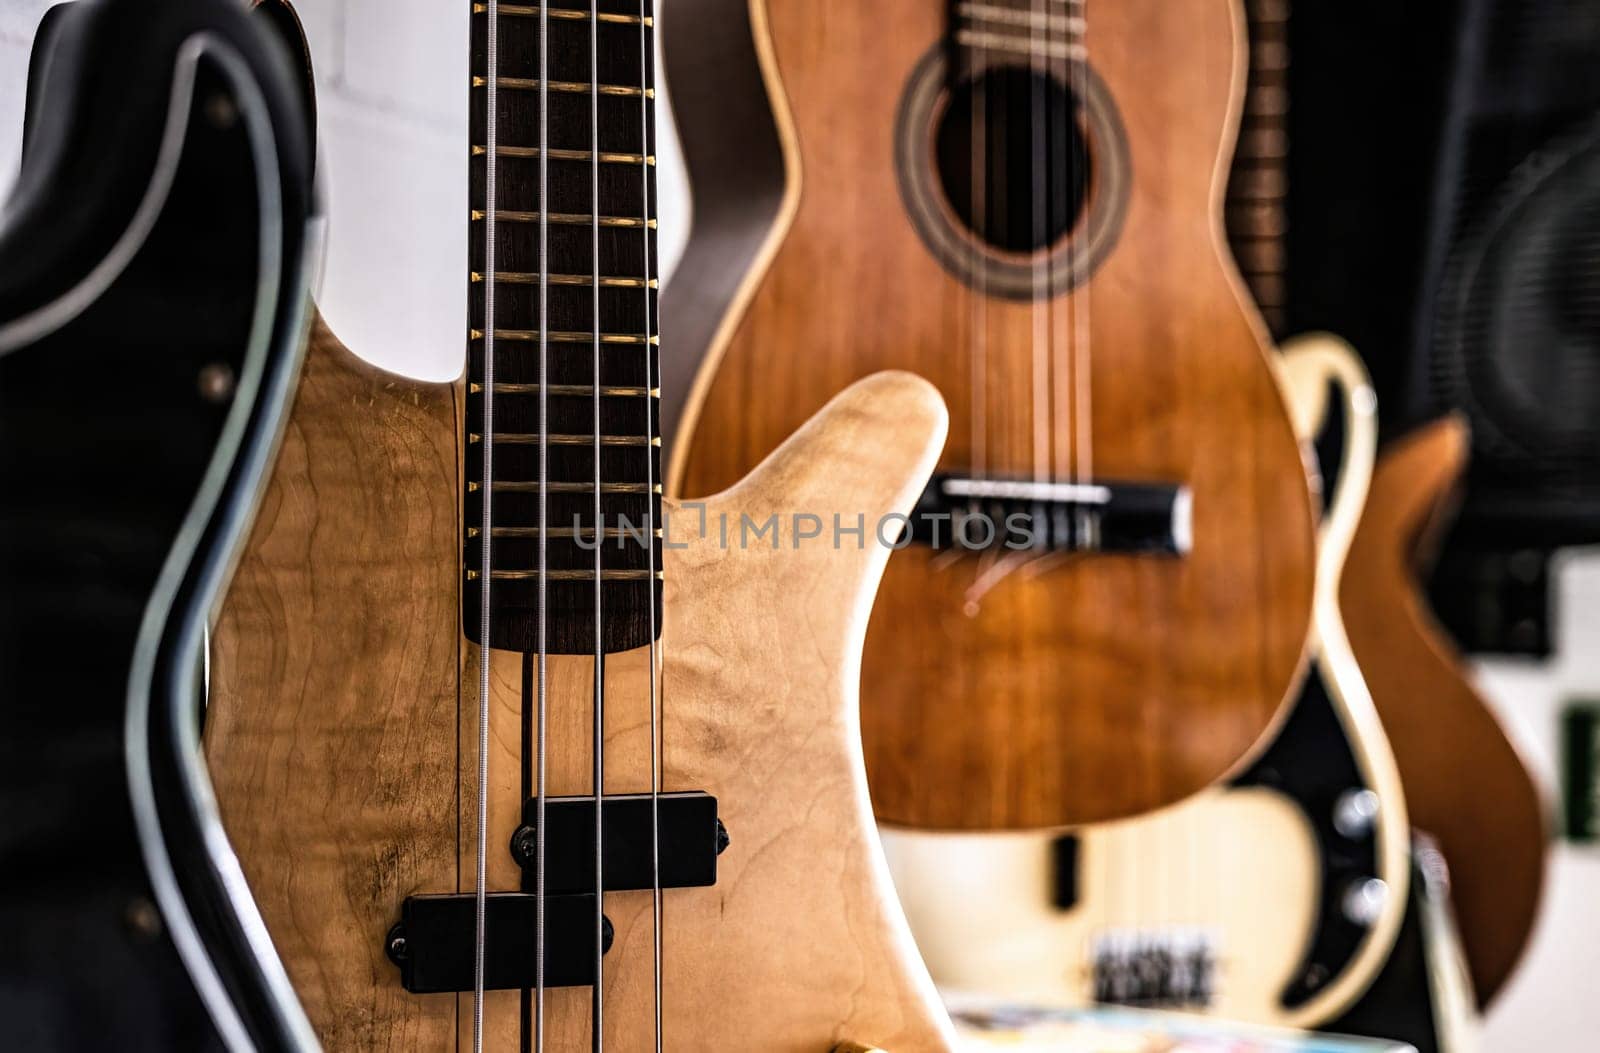 Bass guitar fretboards and strings in music recording studio closeup. Musical instrument for live acoustic perfomance